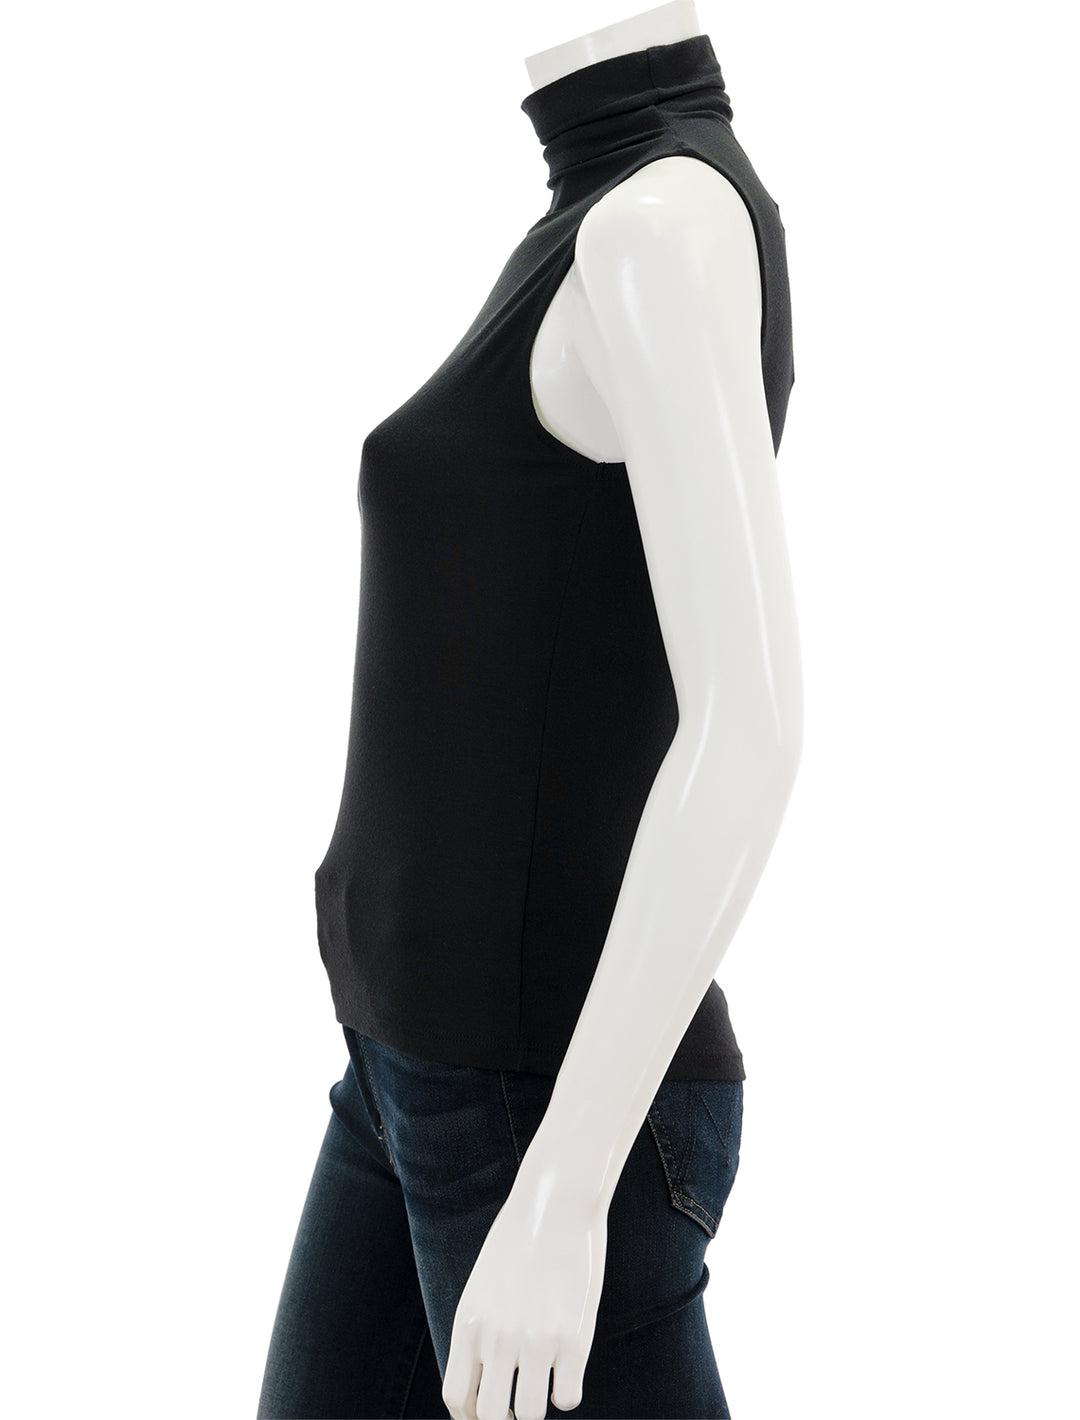 Side view of Vince's black sleeveless turtleneck.